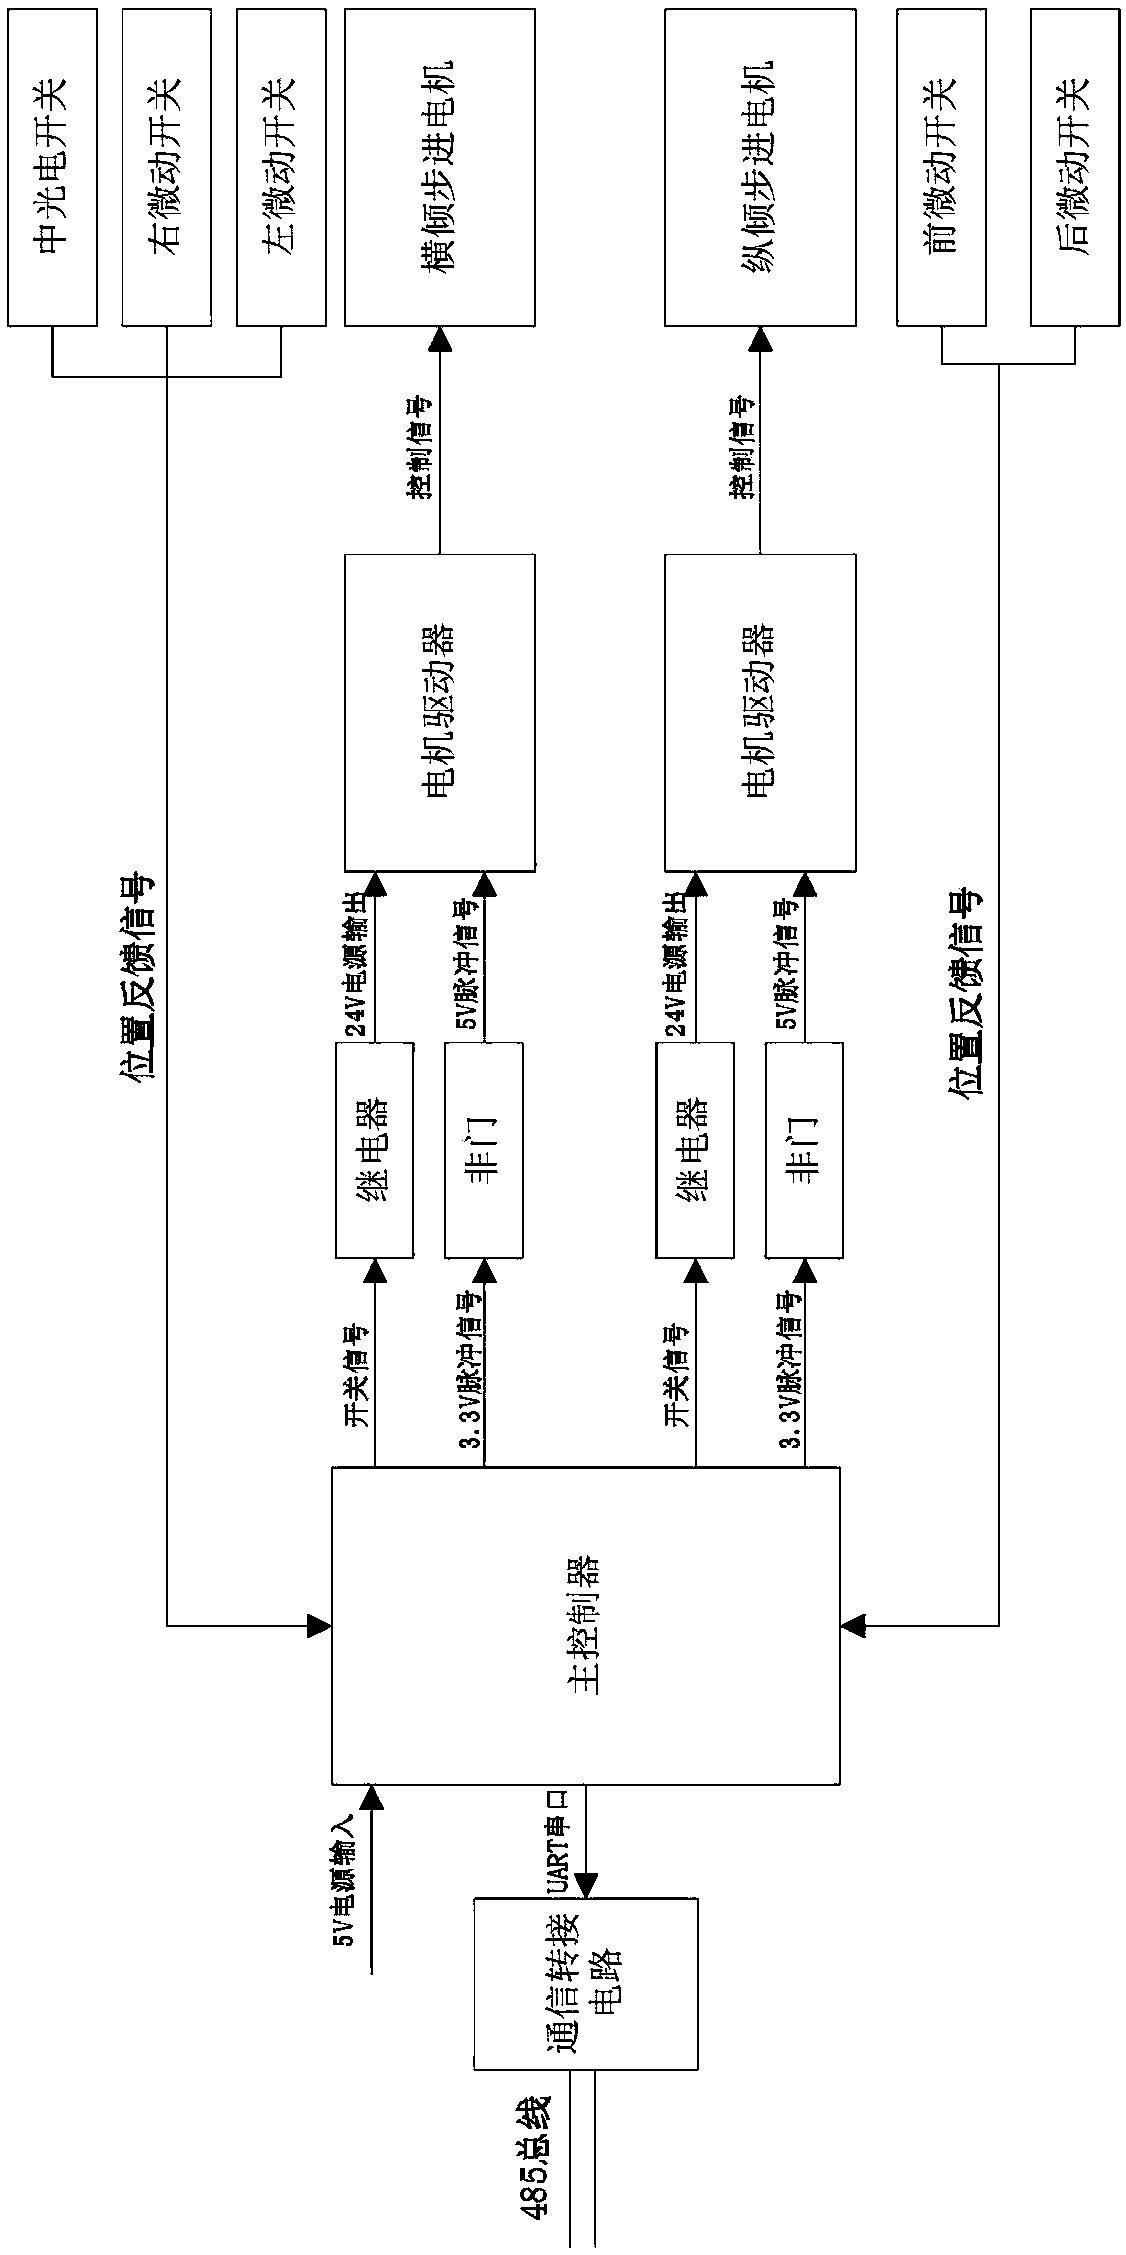 A feedback self-checking underwater glider attitude adjustment device and control method